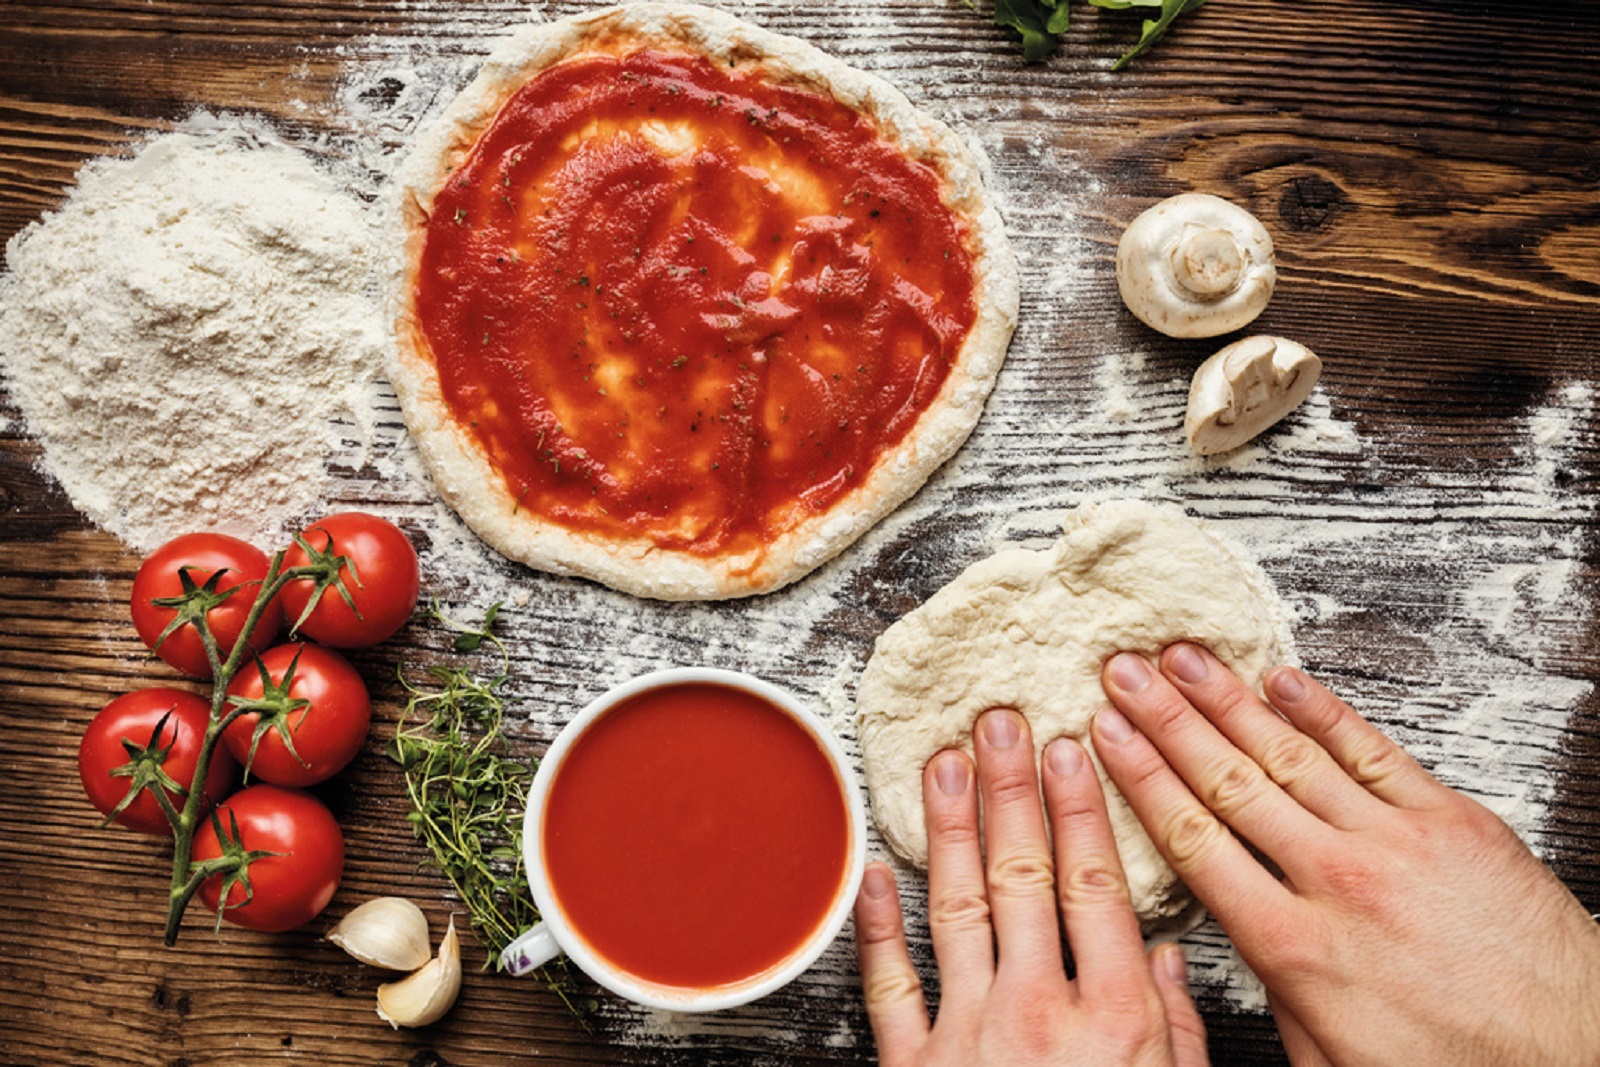 Cooking class in Florence. The secrets of pizza preparation in this cooking class in Florence